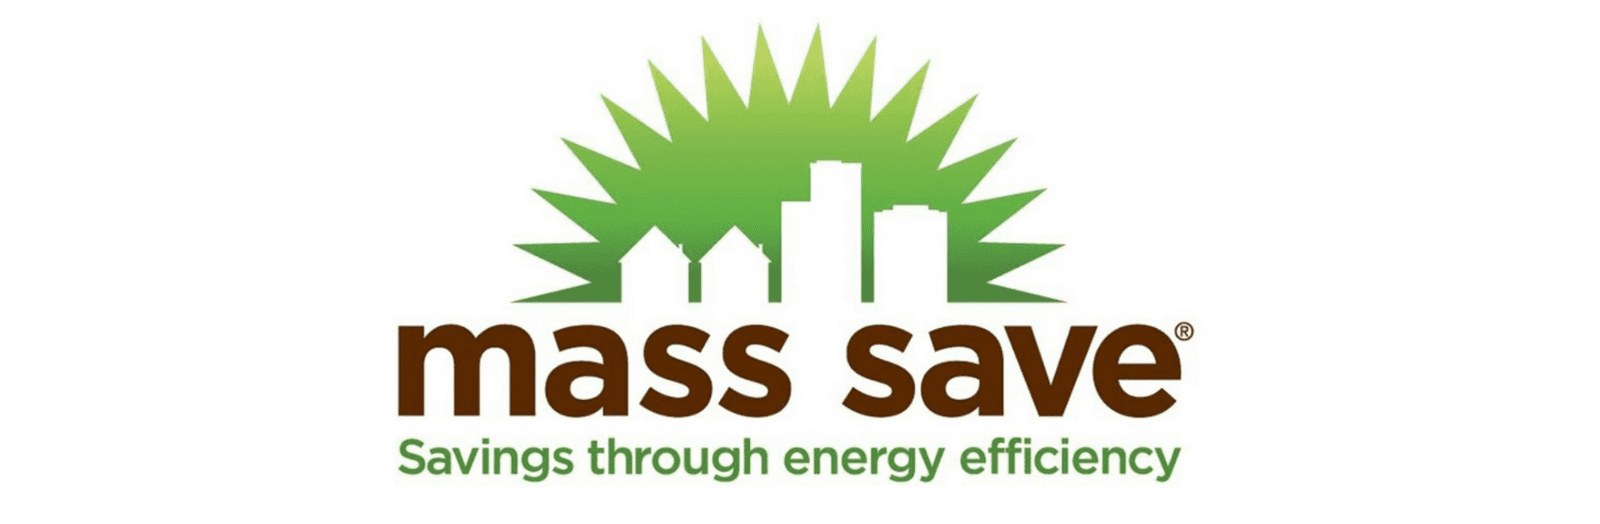 MassSave provides rebates and incentives for homeowners in Massachusetts who are investing in energy efficient heating and cooling equipment.